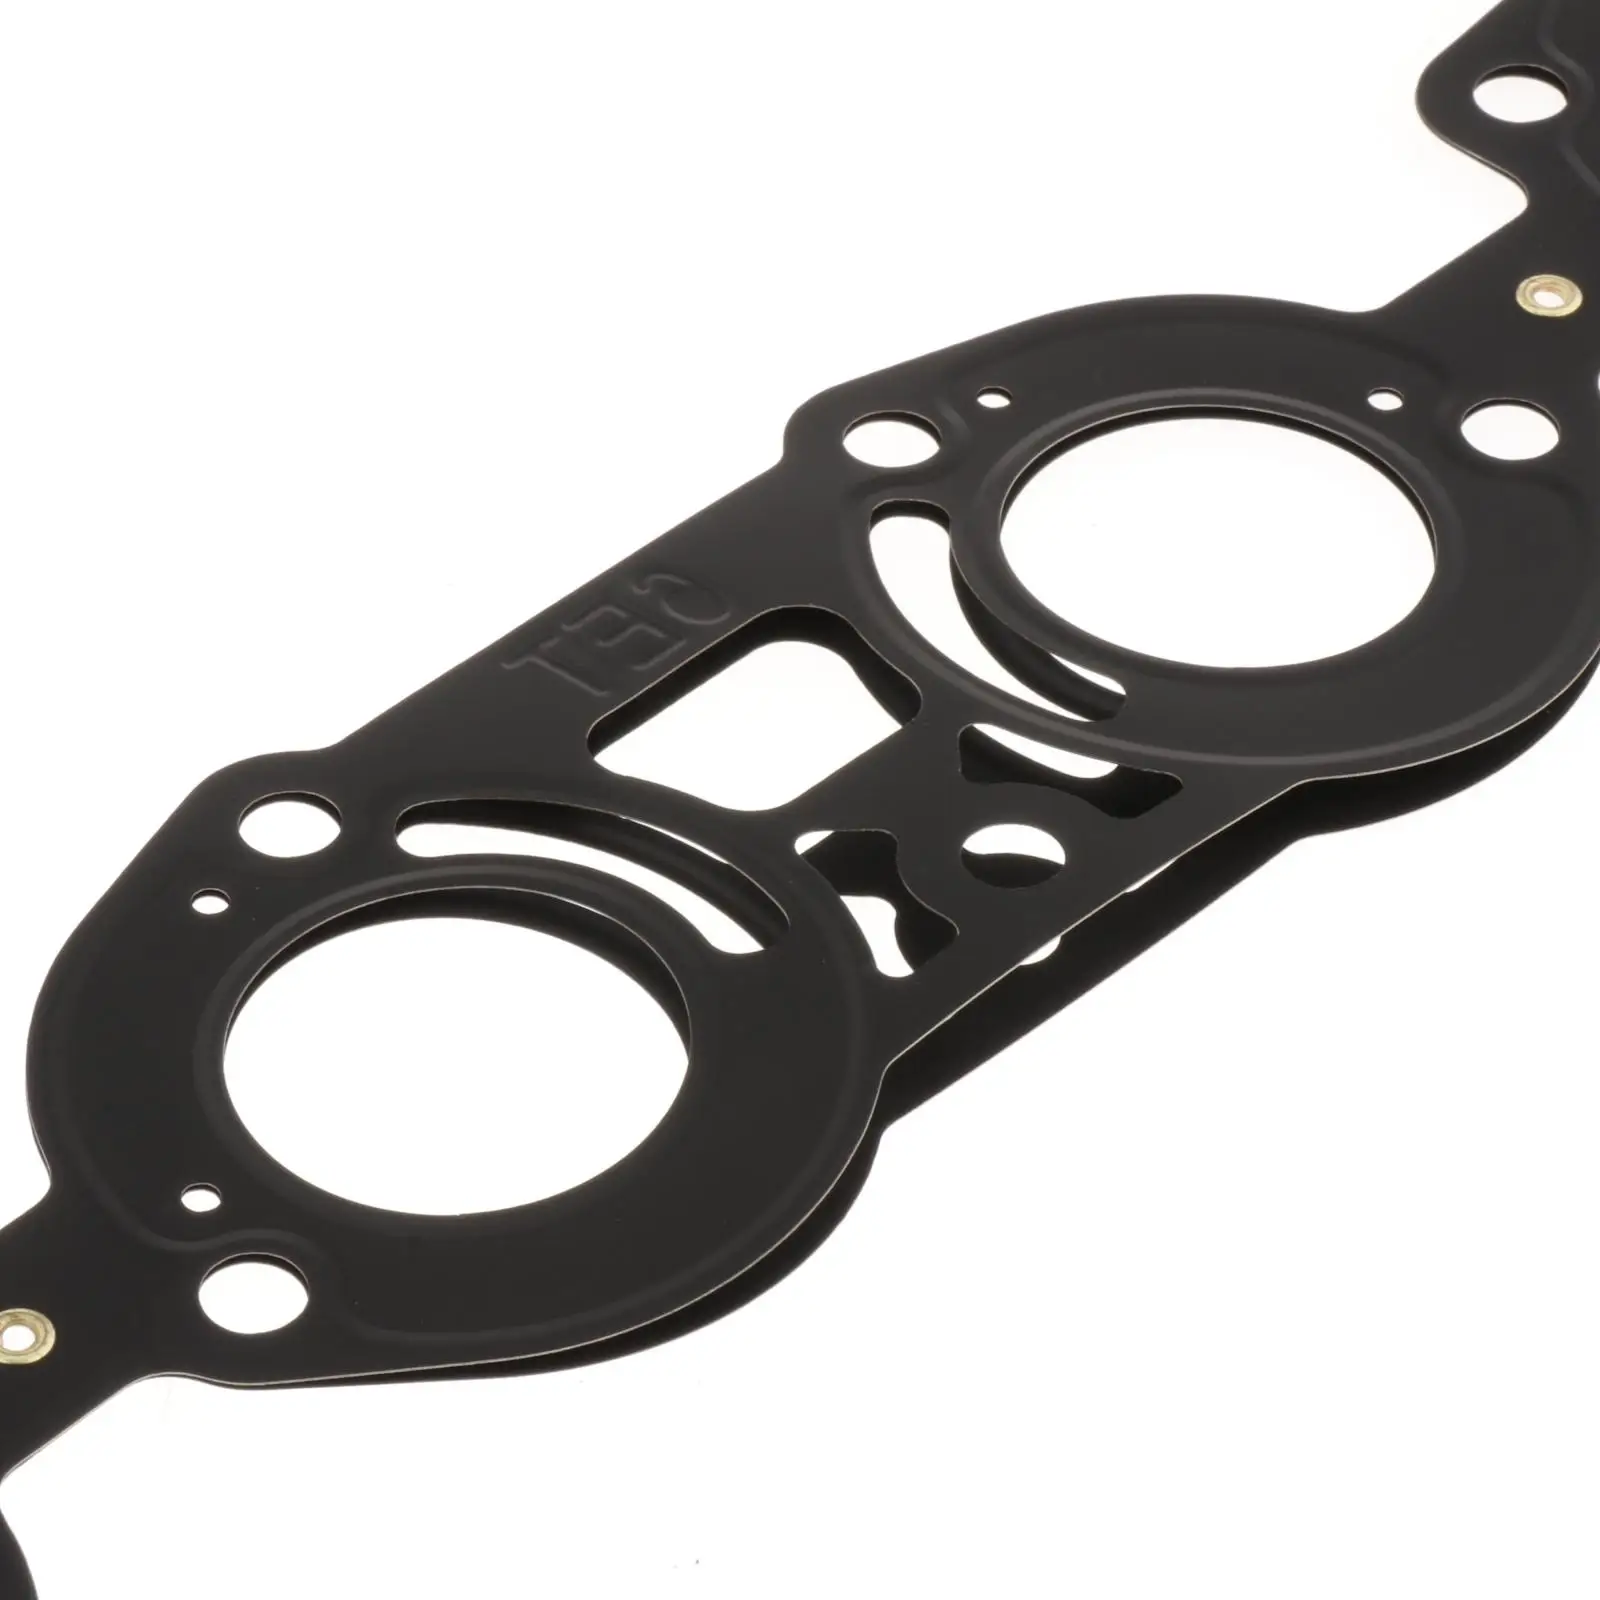 Exhaust Manifold Gasket Fit for Yamaha FZR1800 6ET-14613-00-00 Replacement Parts Accessories